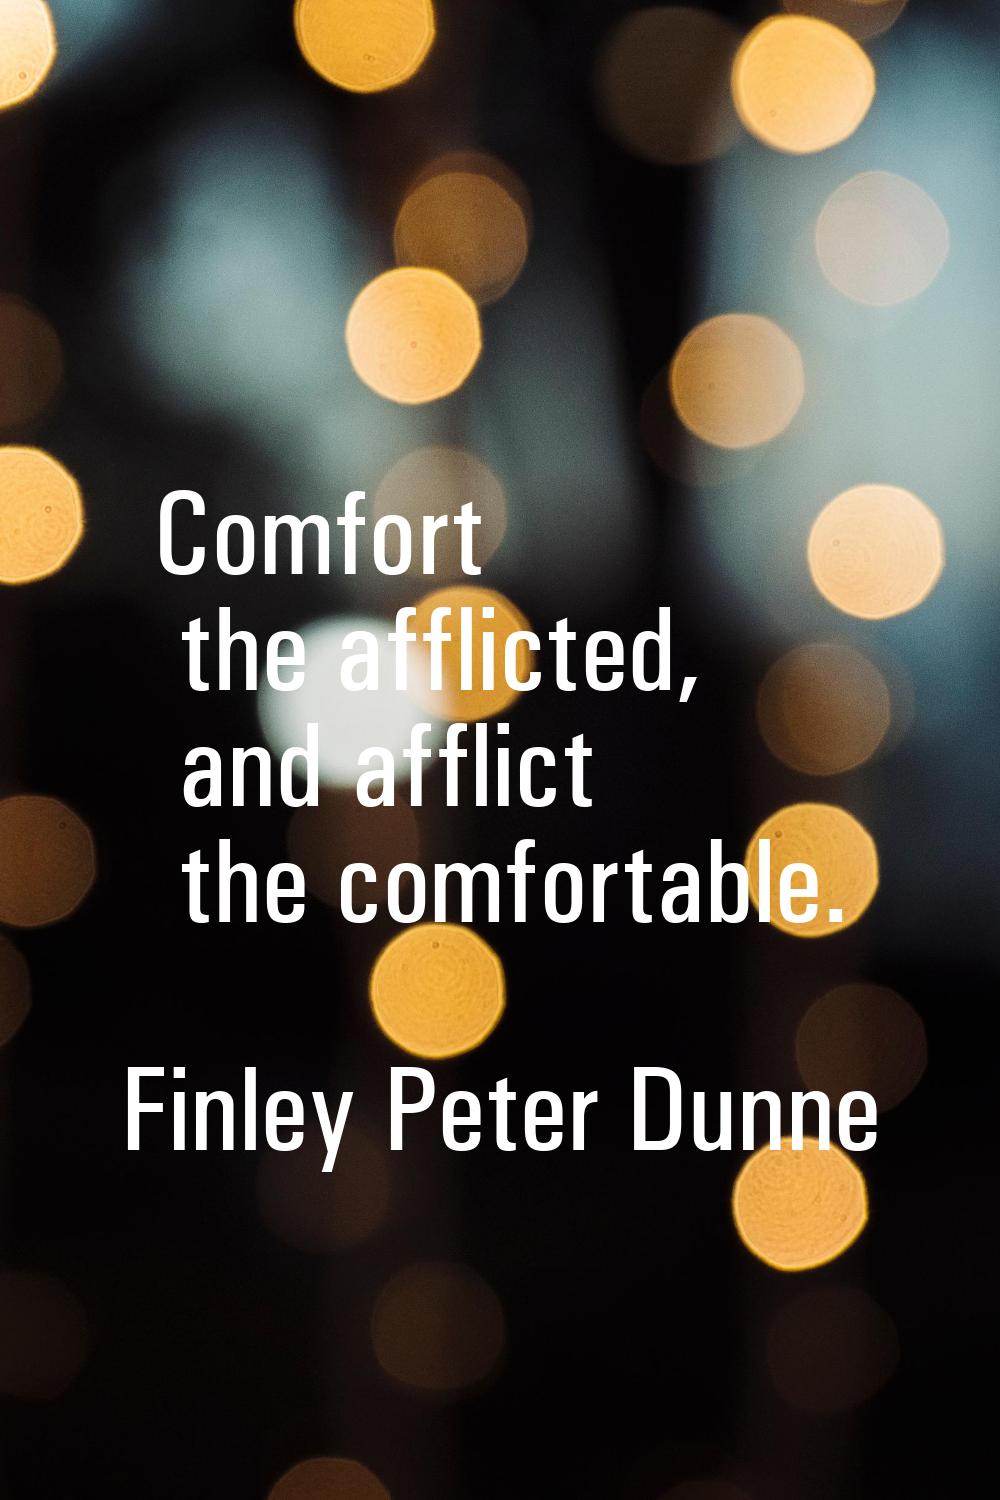 Comfort the afflicted, and afflict the comfortable.